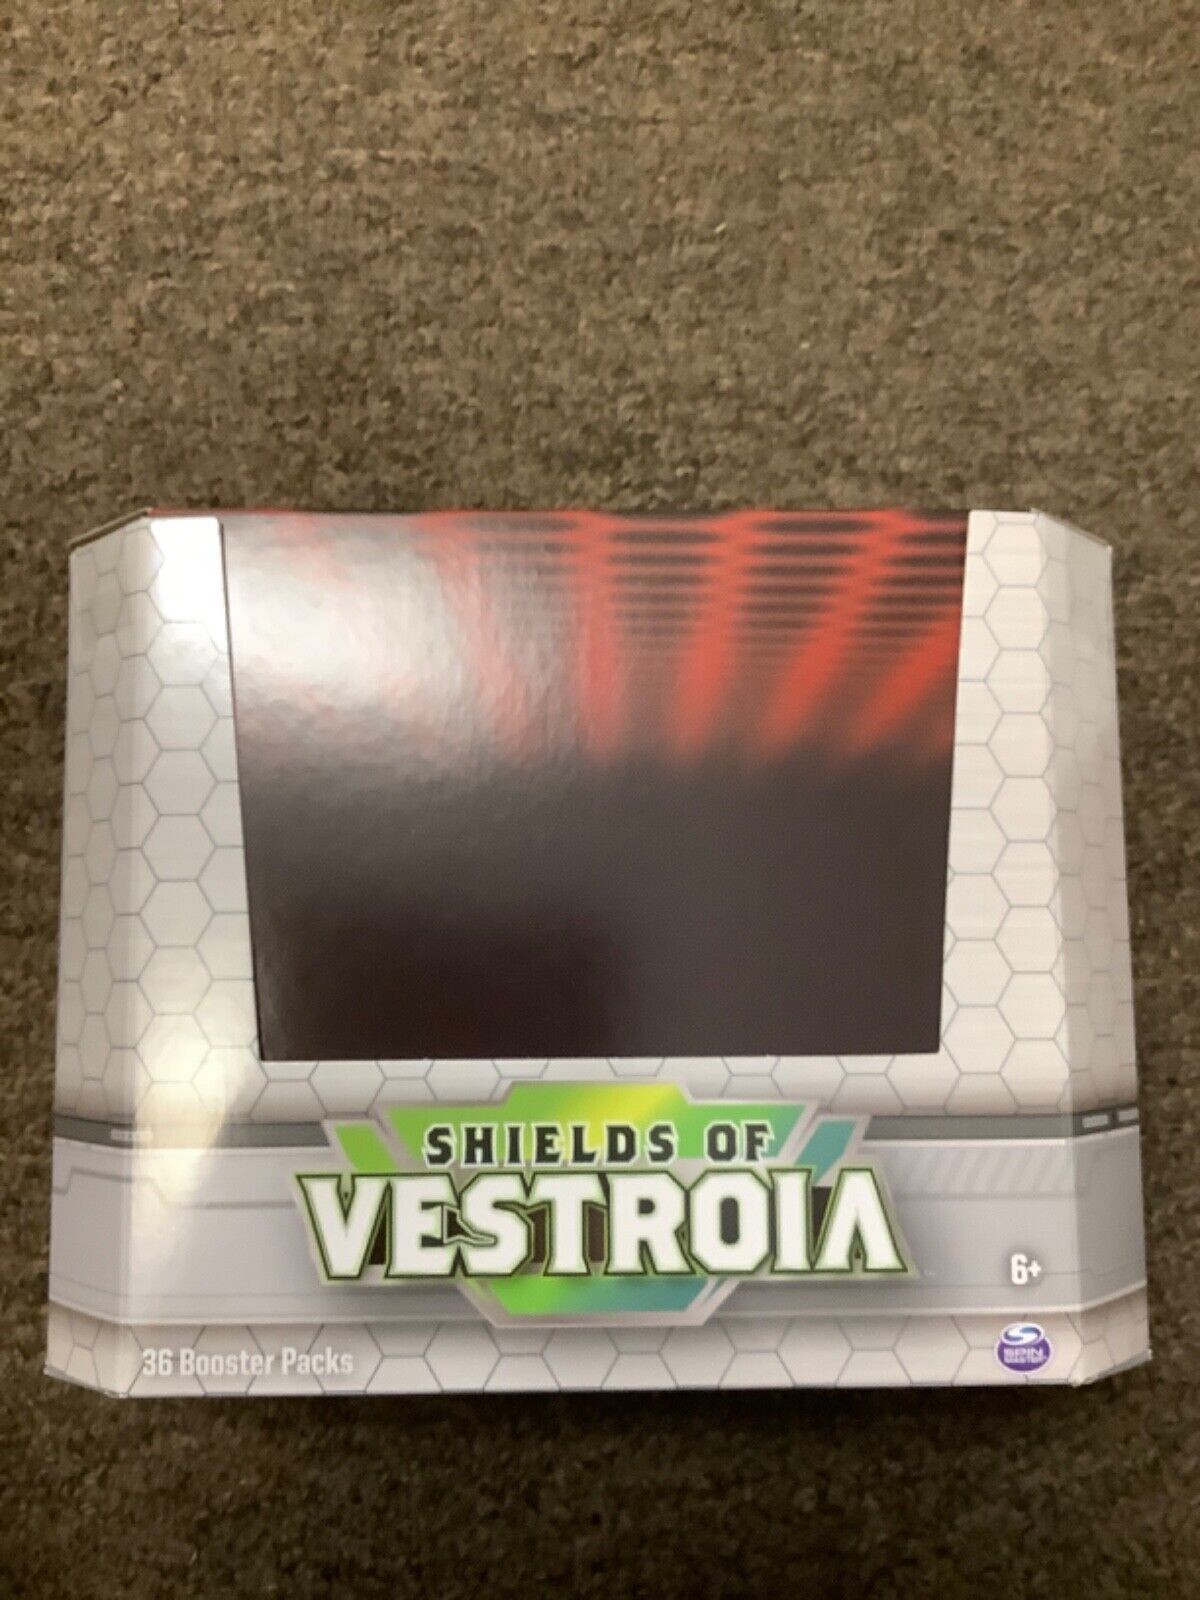 Bakugan Pro shields of vestroia 36 Booster Packs Booster Box 11 cards per pack